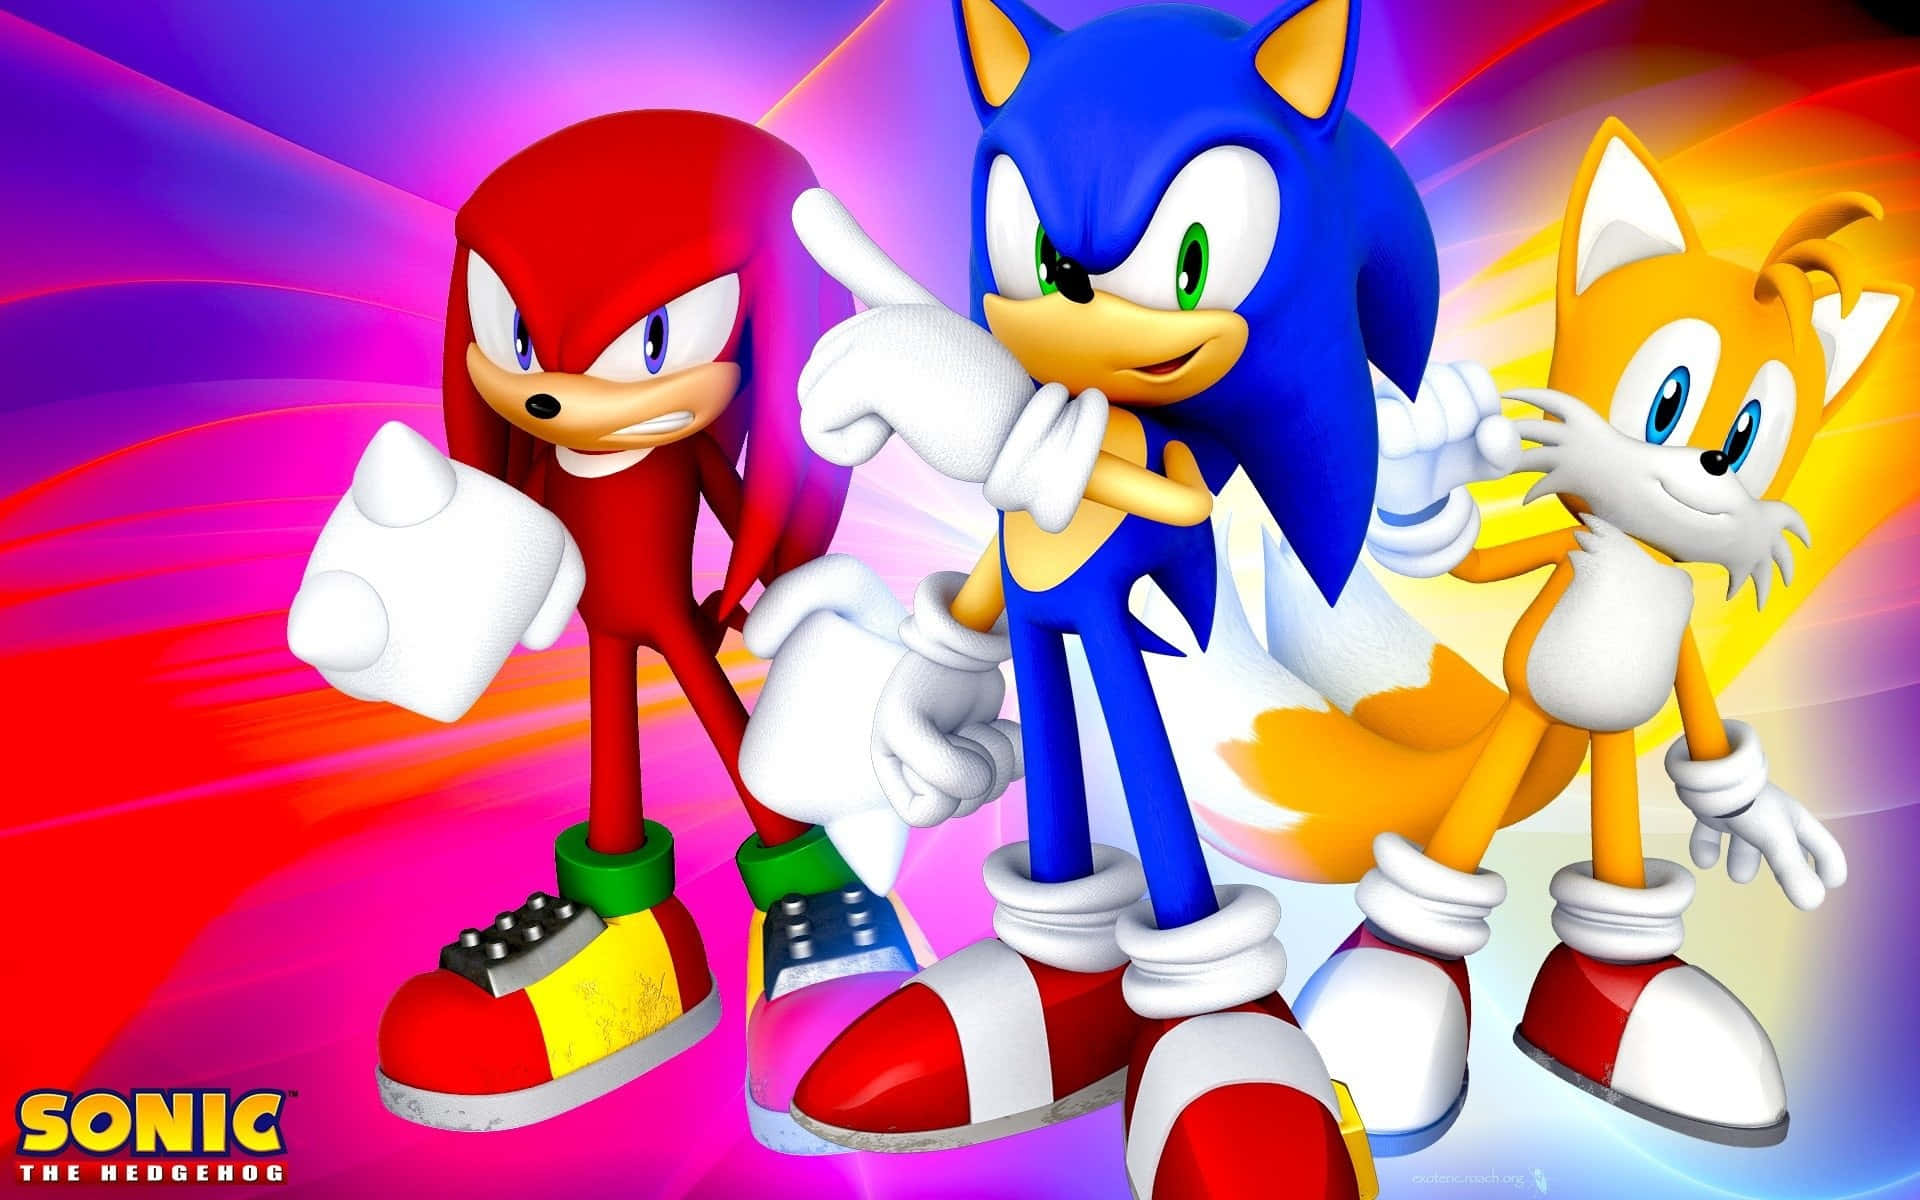 Sonic and Knuckles in action wallpaper Wallpaper